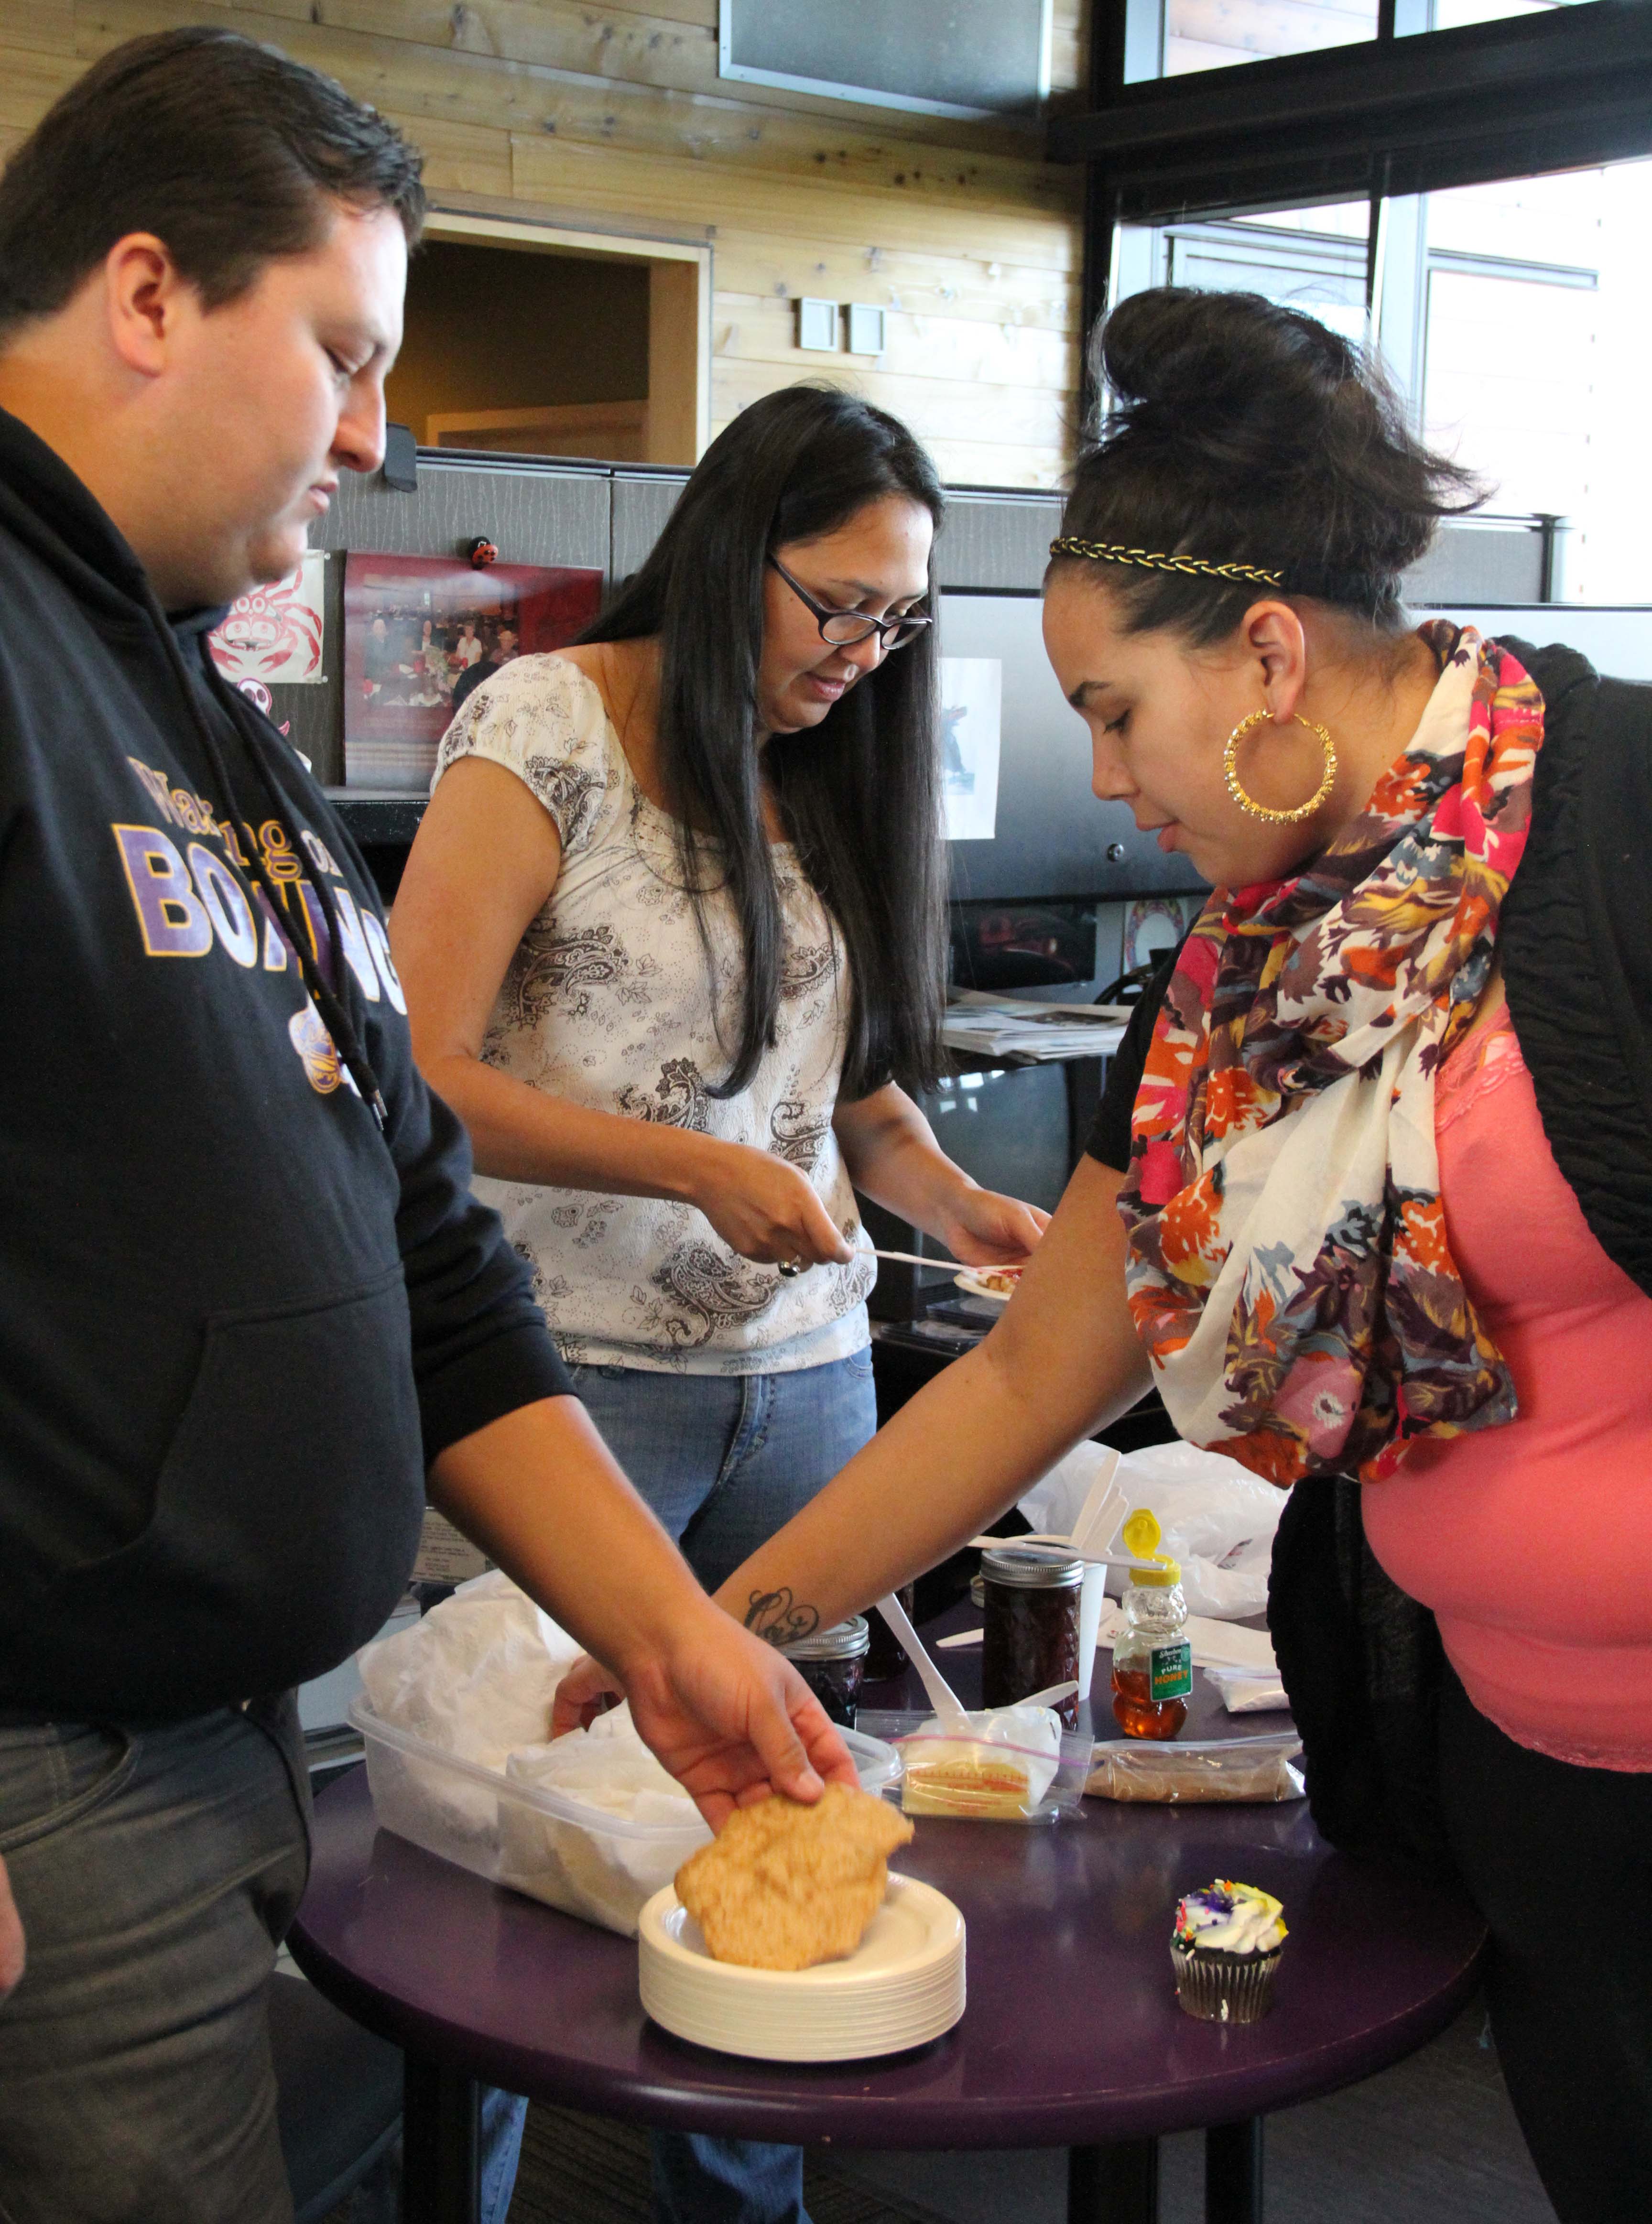 Staff enjoyed a morning treat of warm frybread.Photo by Brandy N. Monteuil